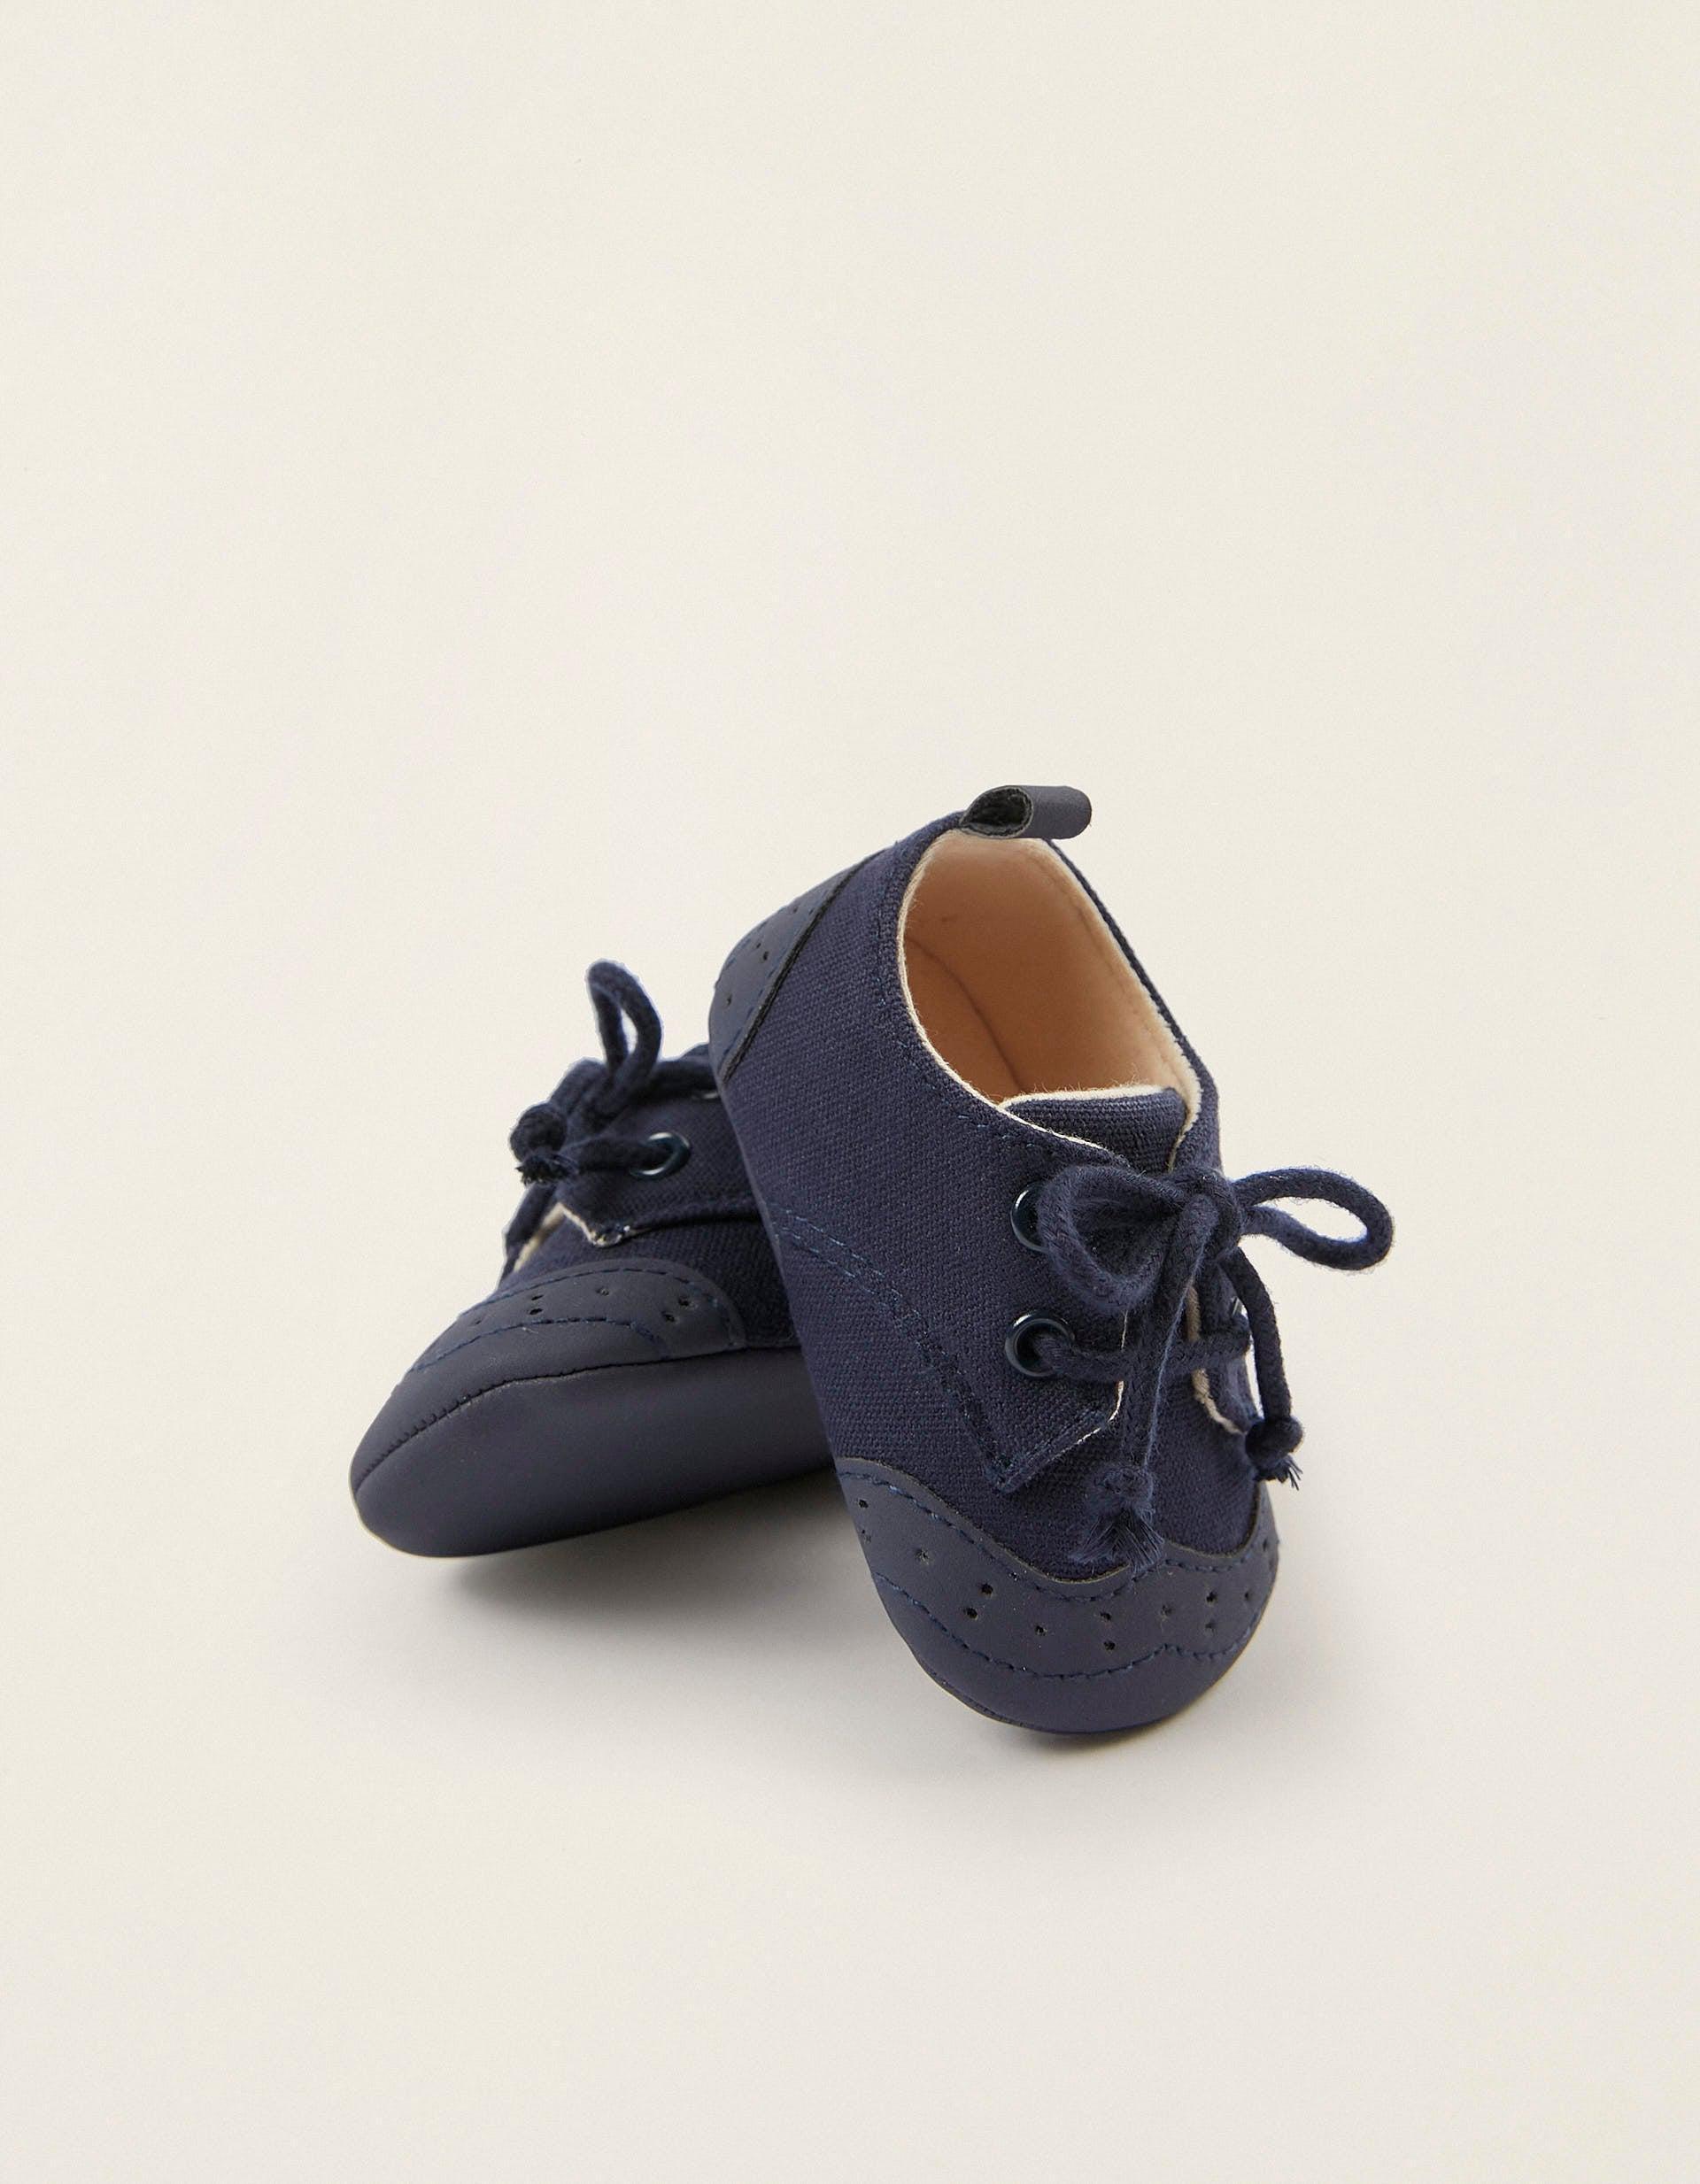 Gant - Navy Detailed Shoes, Baby Boys